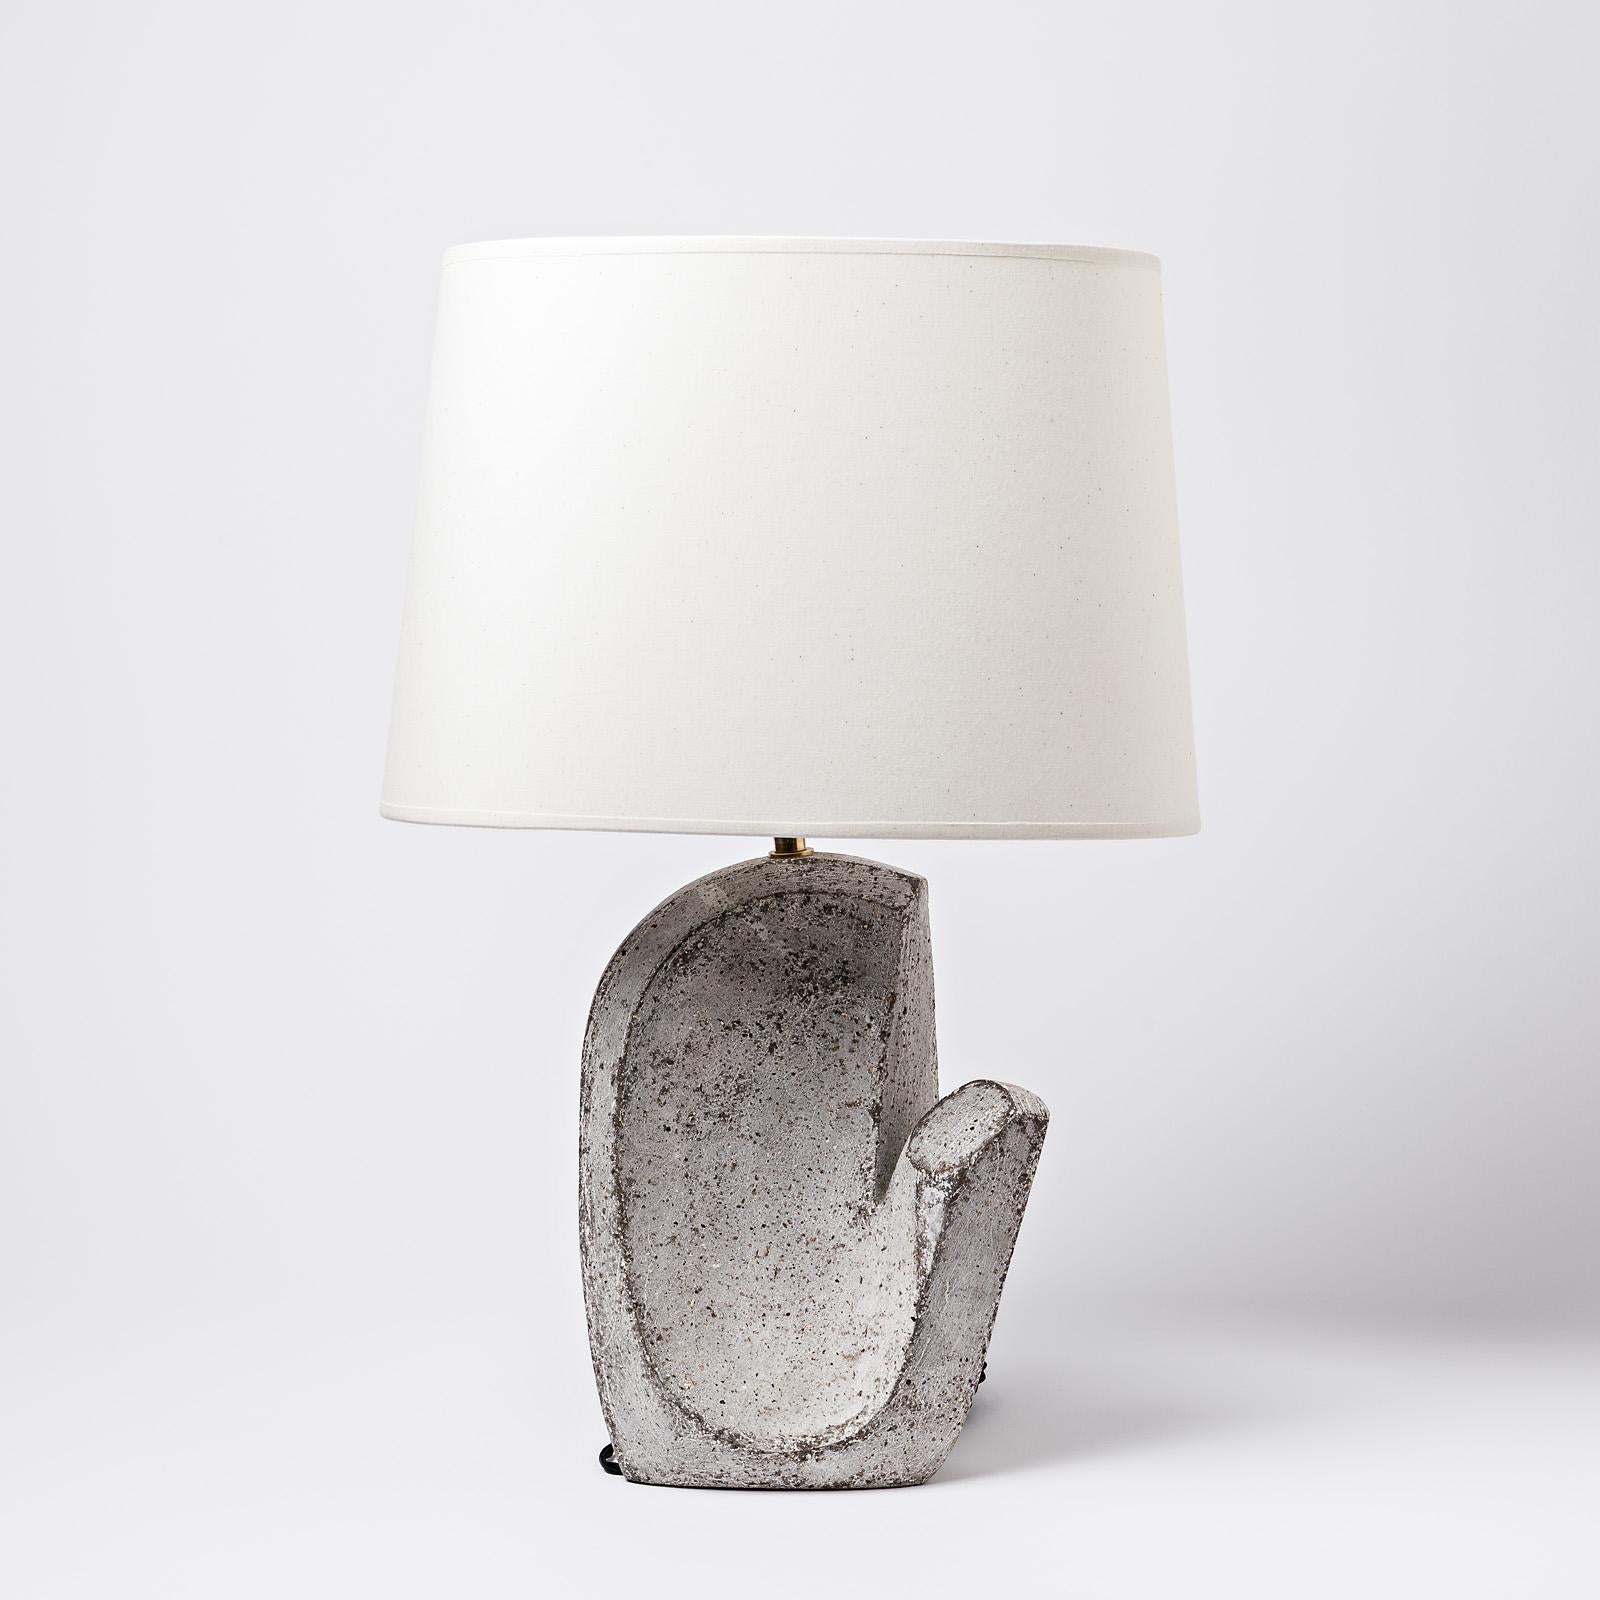 Pair of Ceramic Table Lamps by Maarten Stuer, circa 2021 For Sale 4